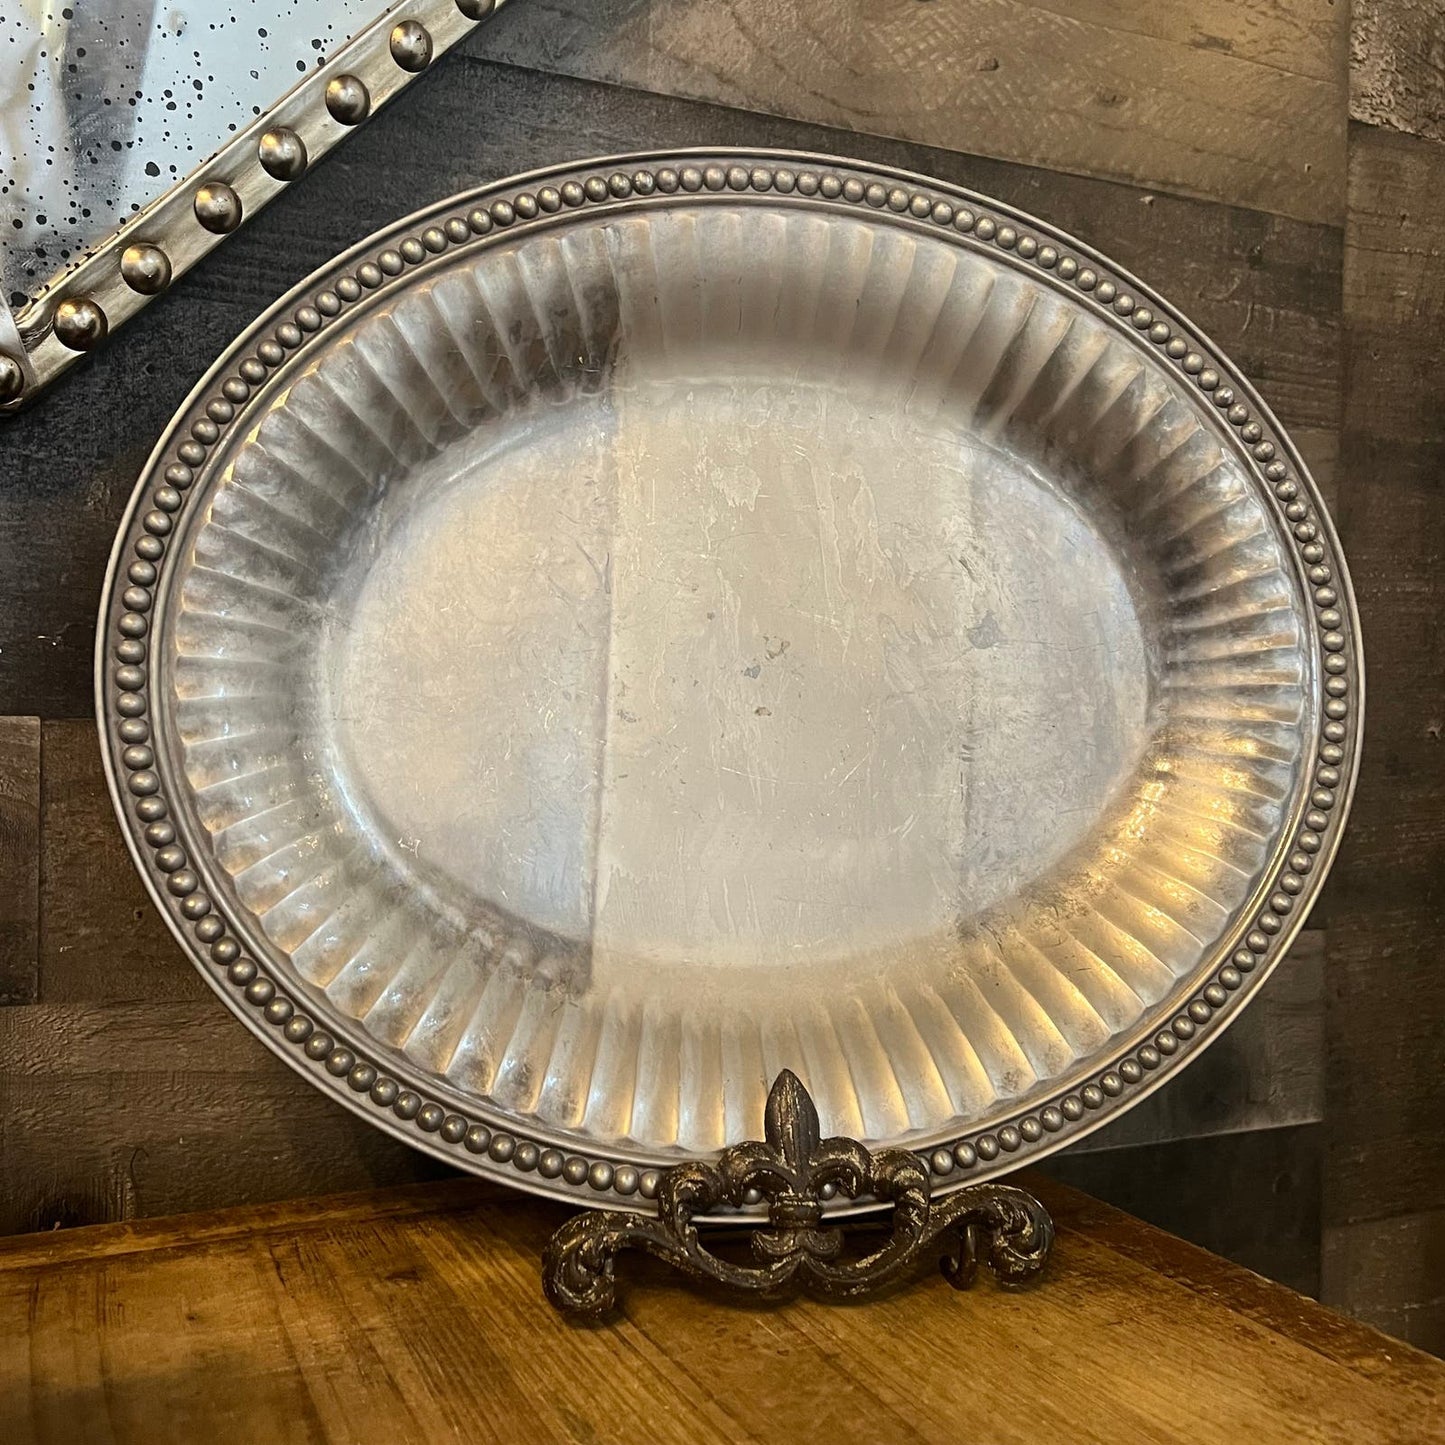 Wilton Armetale Flutes and Pearls Oval Serving Tray